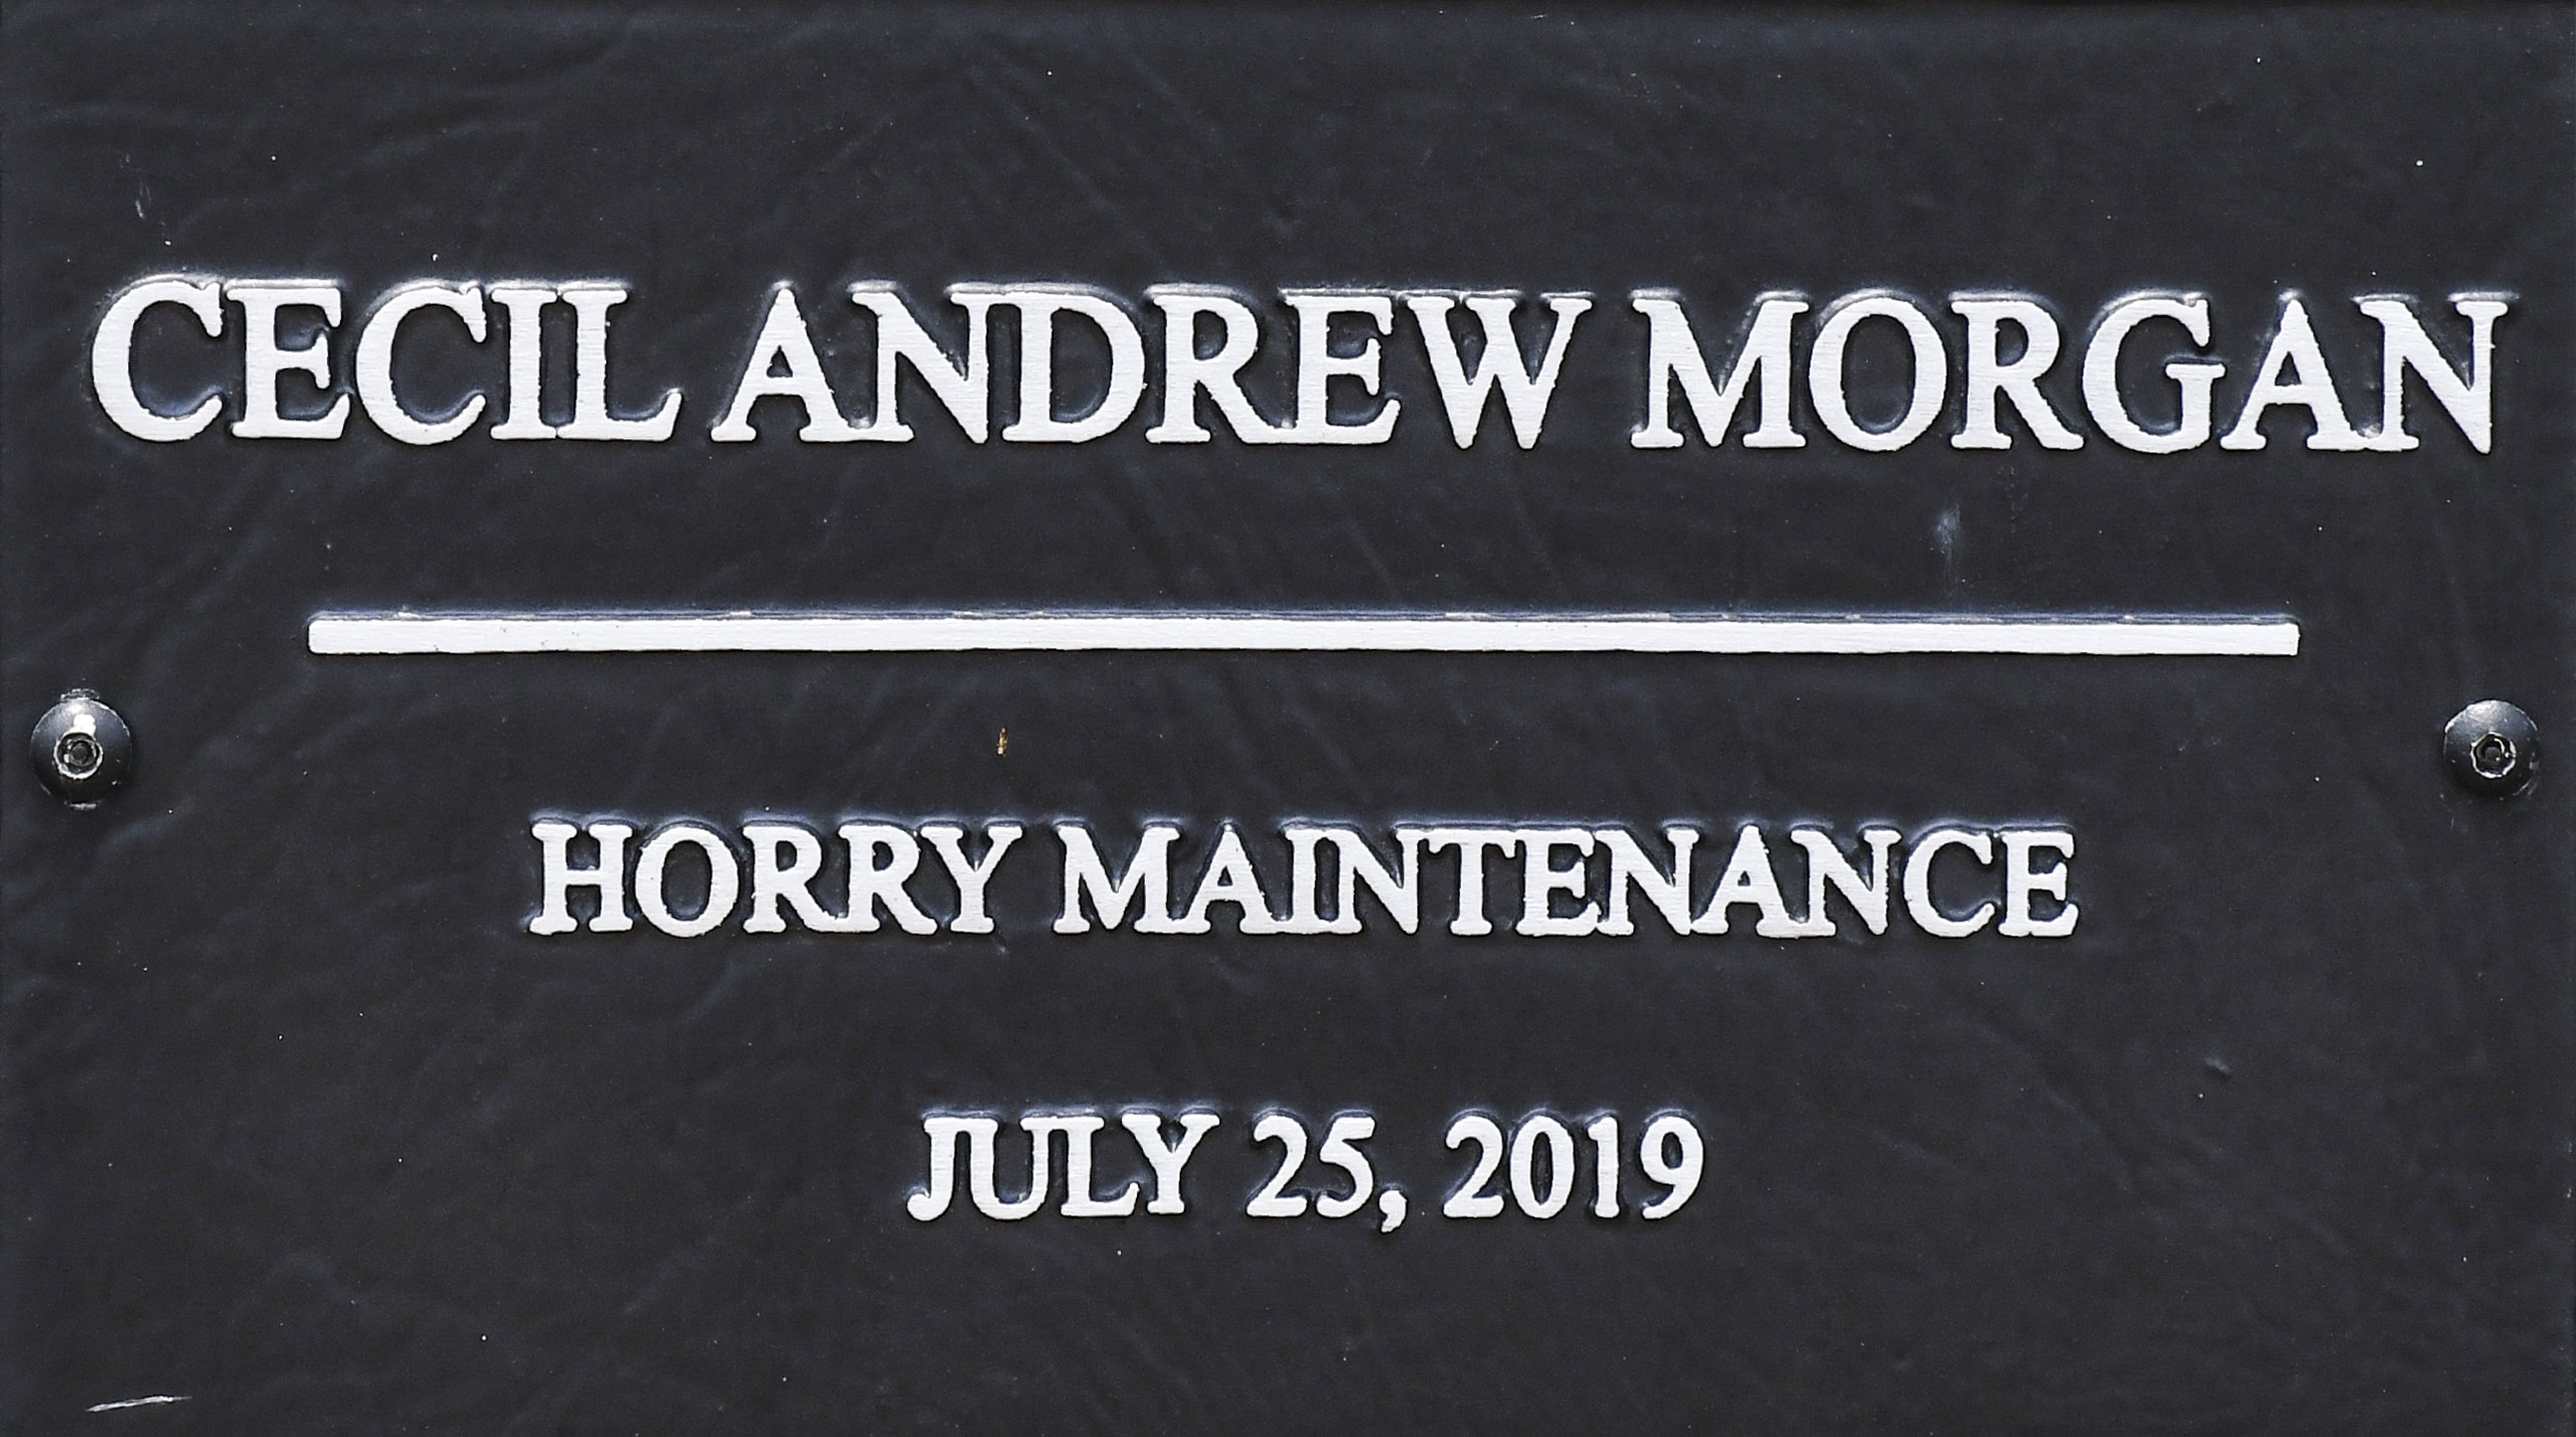 SCDOT Worker Cecil Andrew Morgan - Horry Maintenance - July 25, 2019 